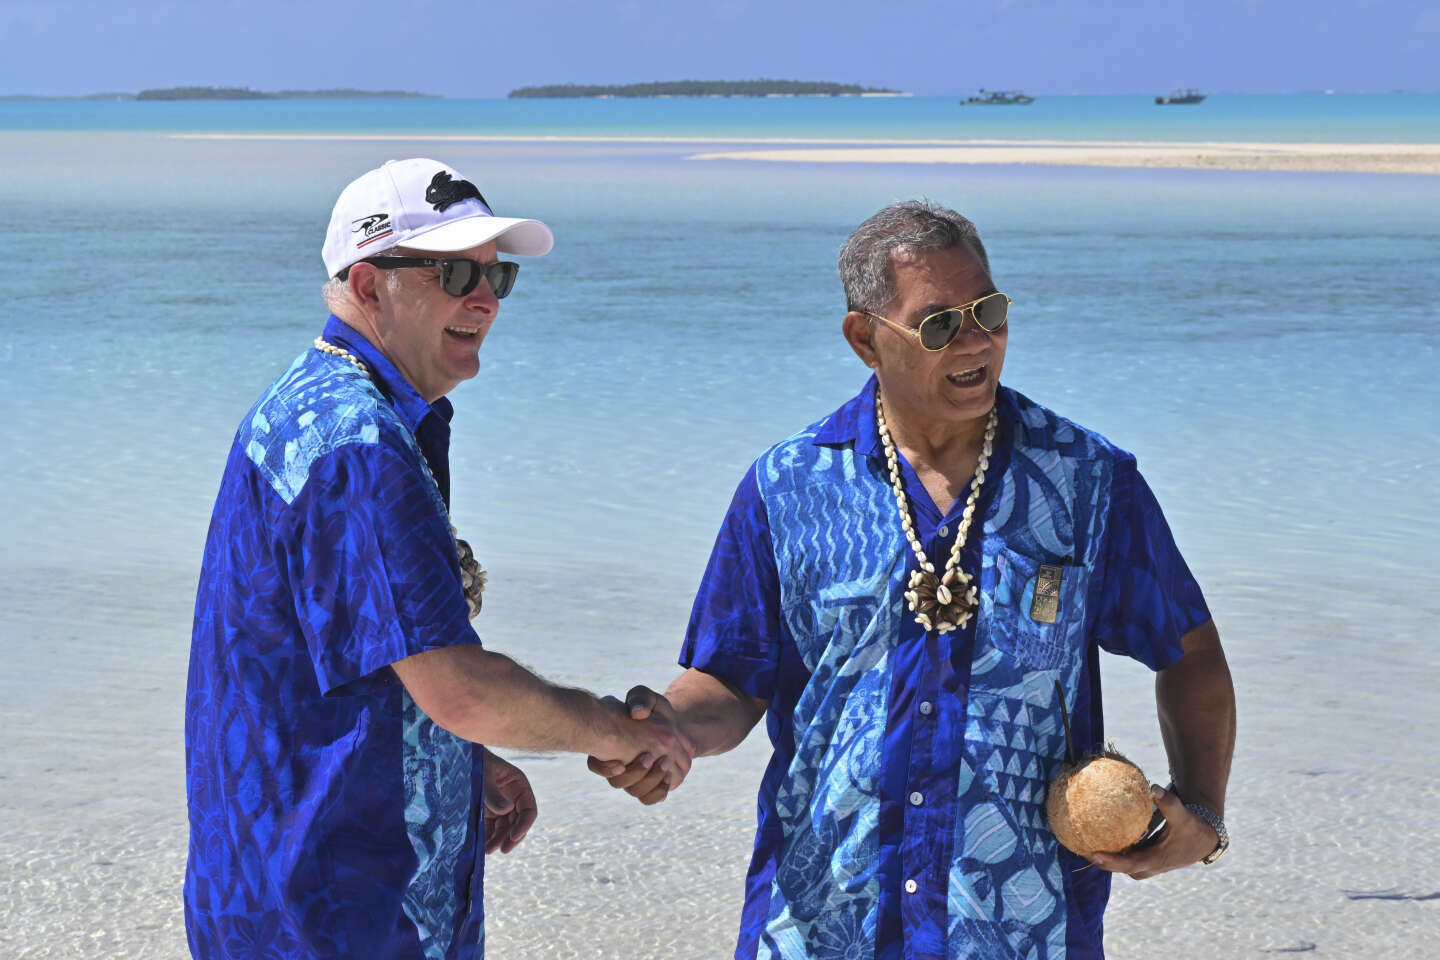 Australia offers climate refuge to Tuvalu citizens